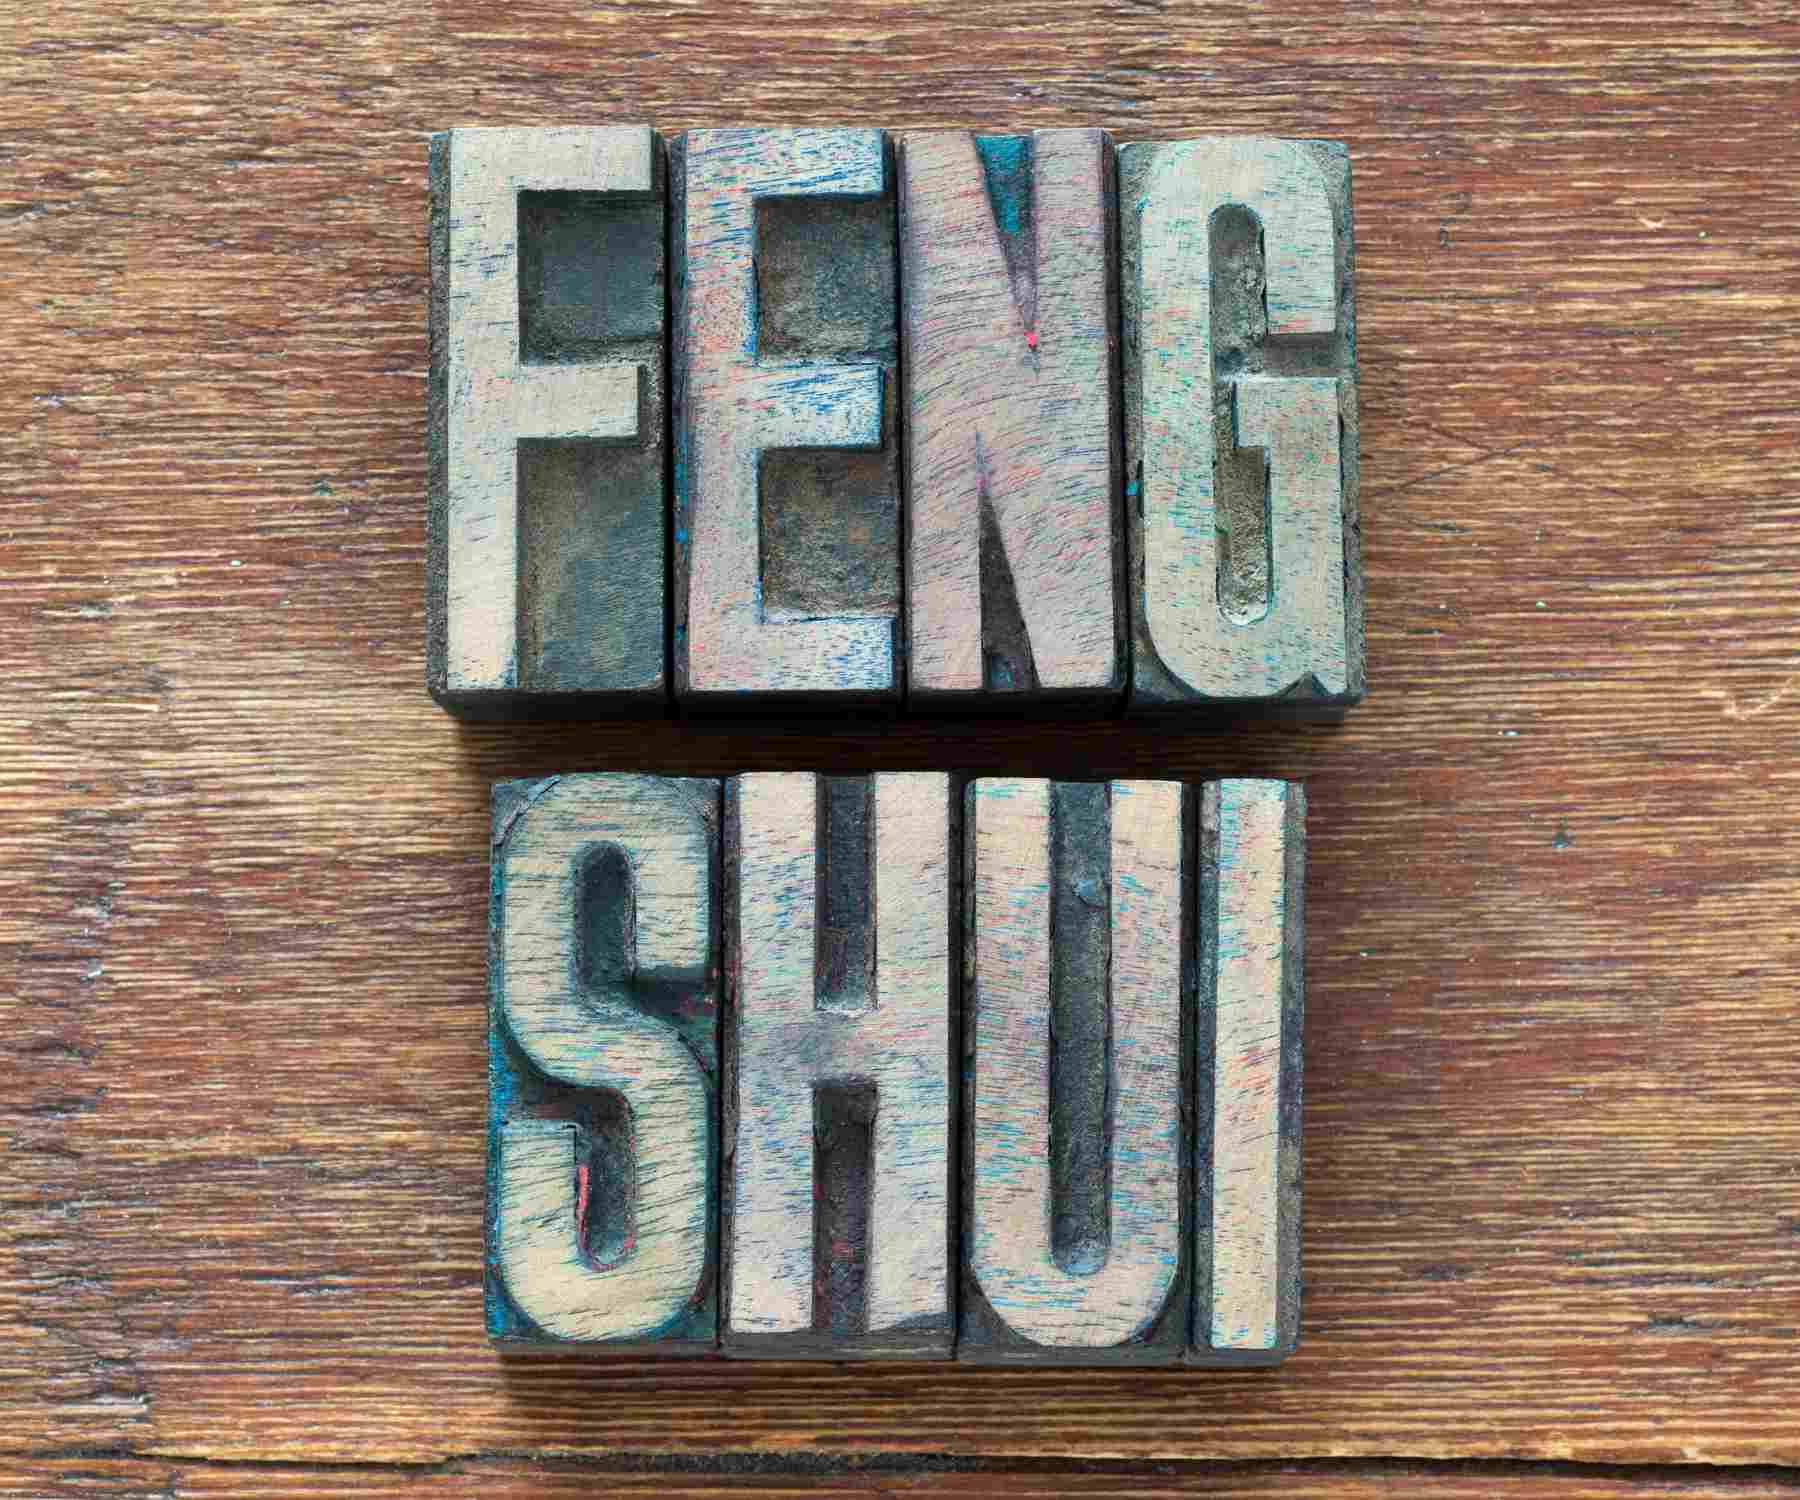 Word feng shui is large wood letters on wooden surface